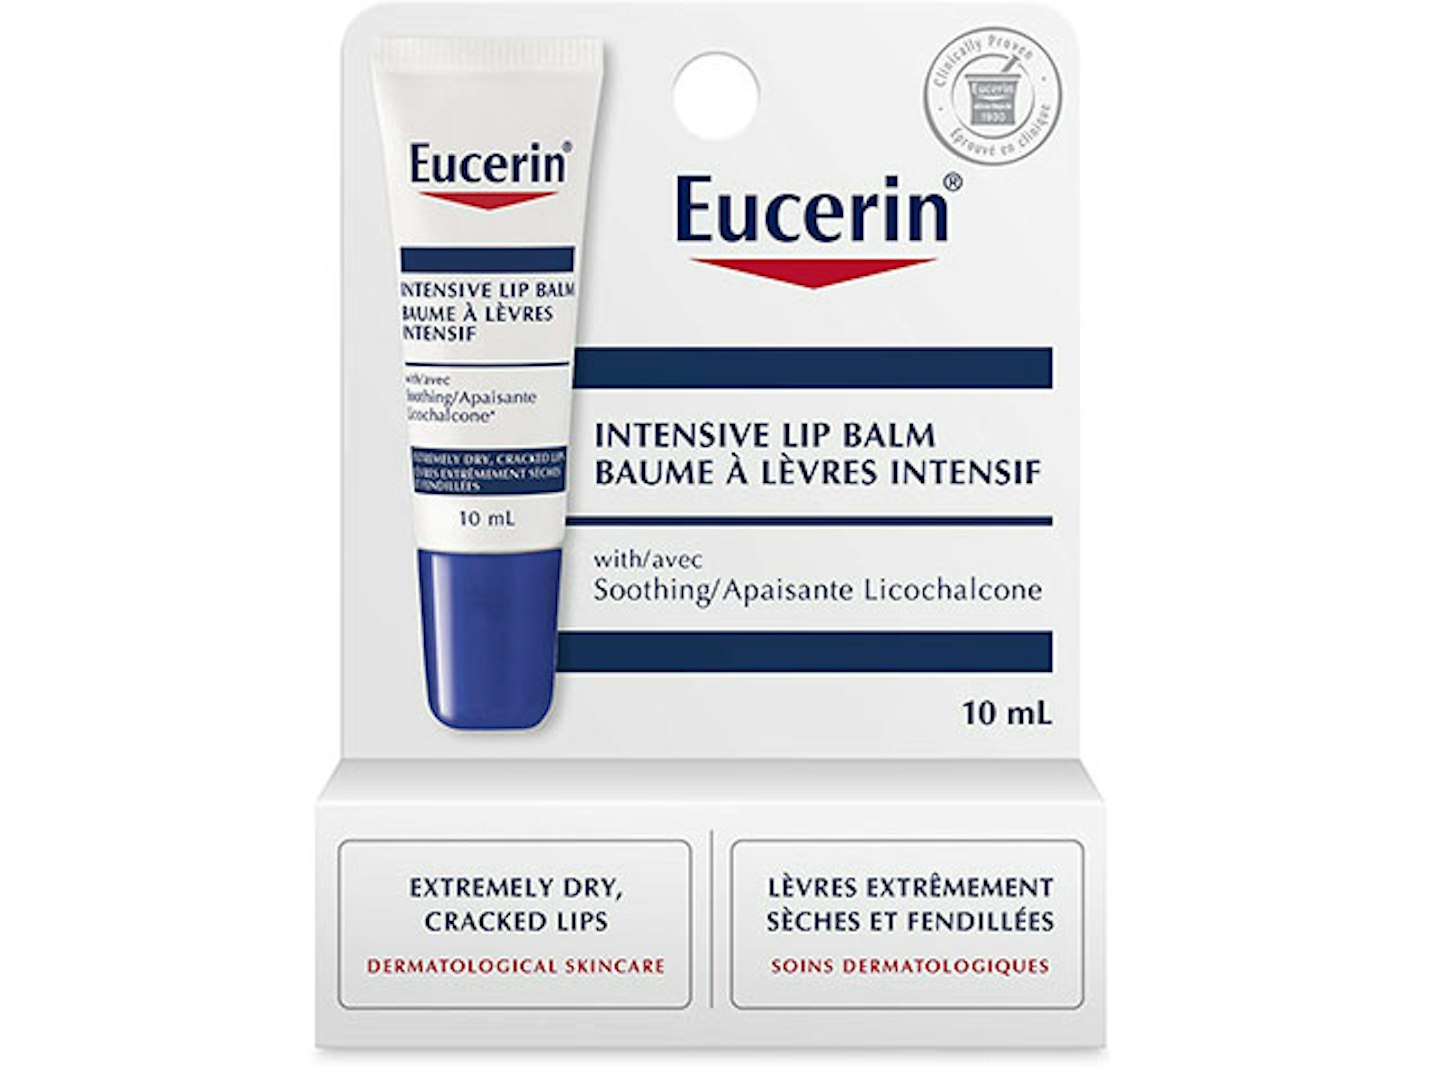 Eucerin's Dry Skin Intensive Lip Balm with soothing liquorice extract and Evening Primrose Oil.